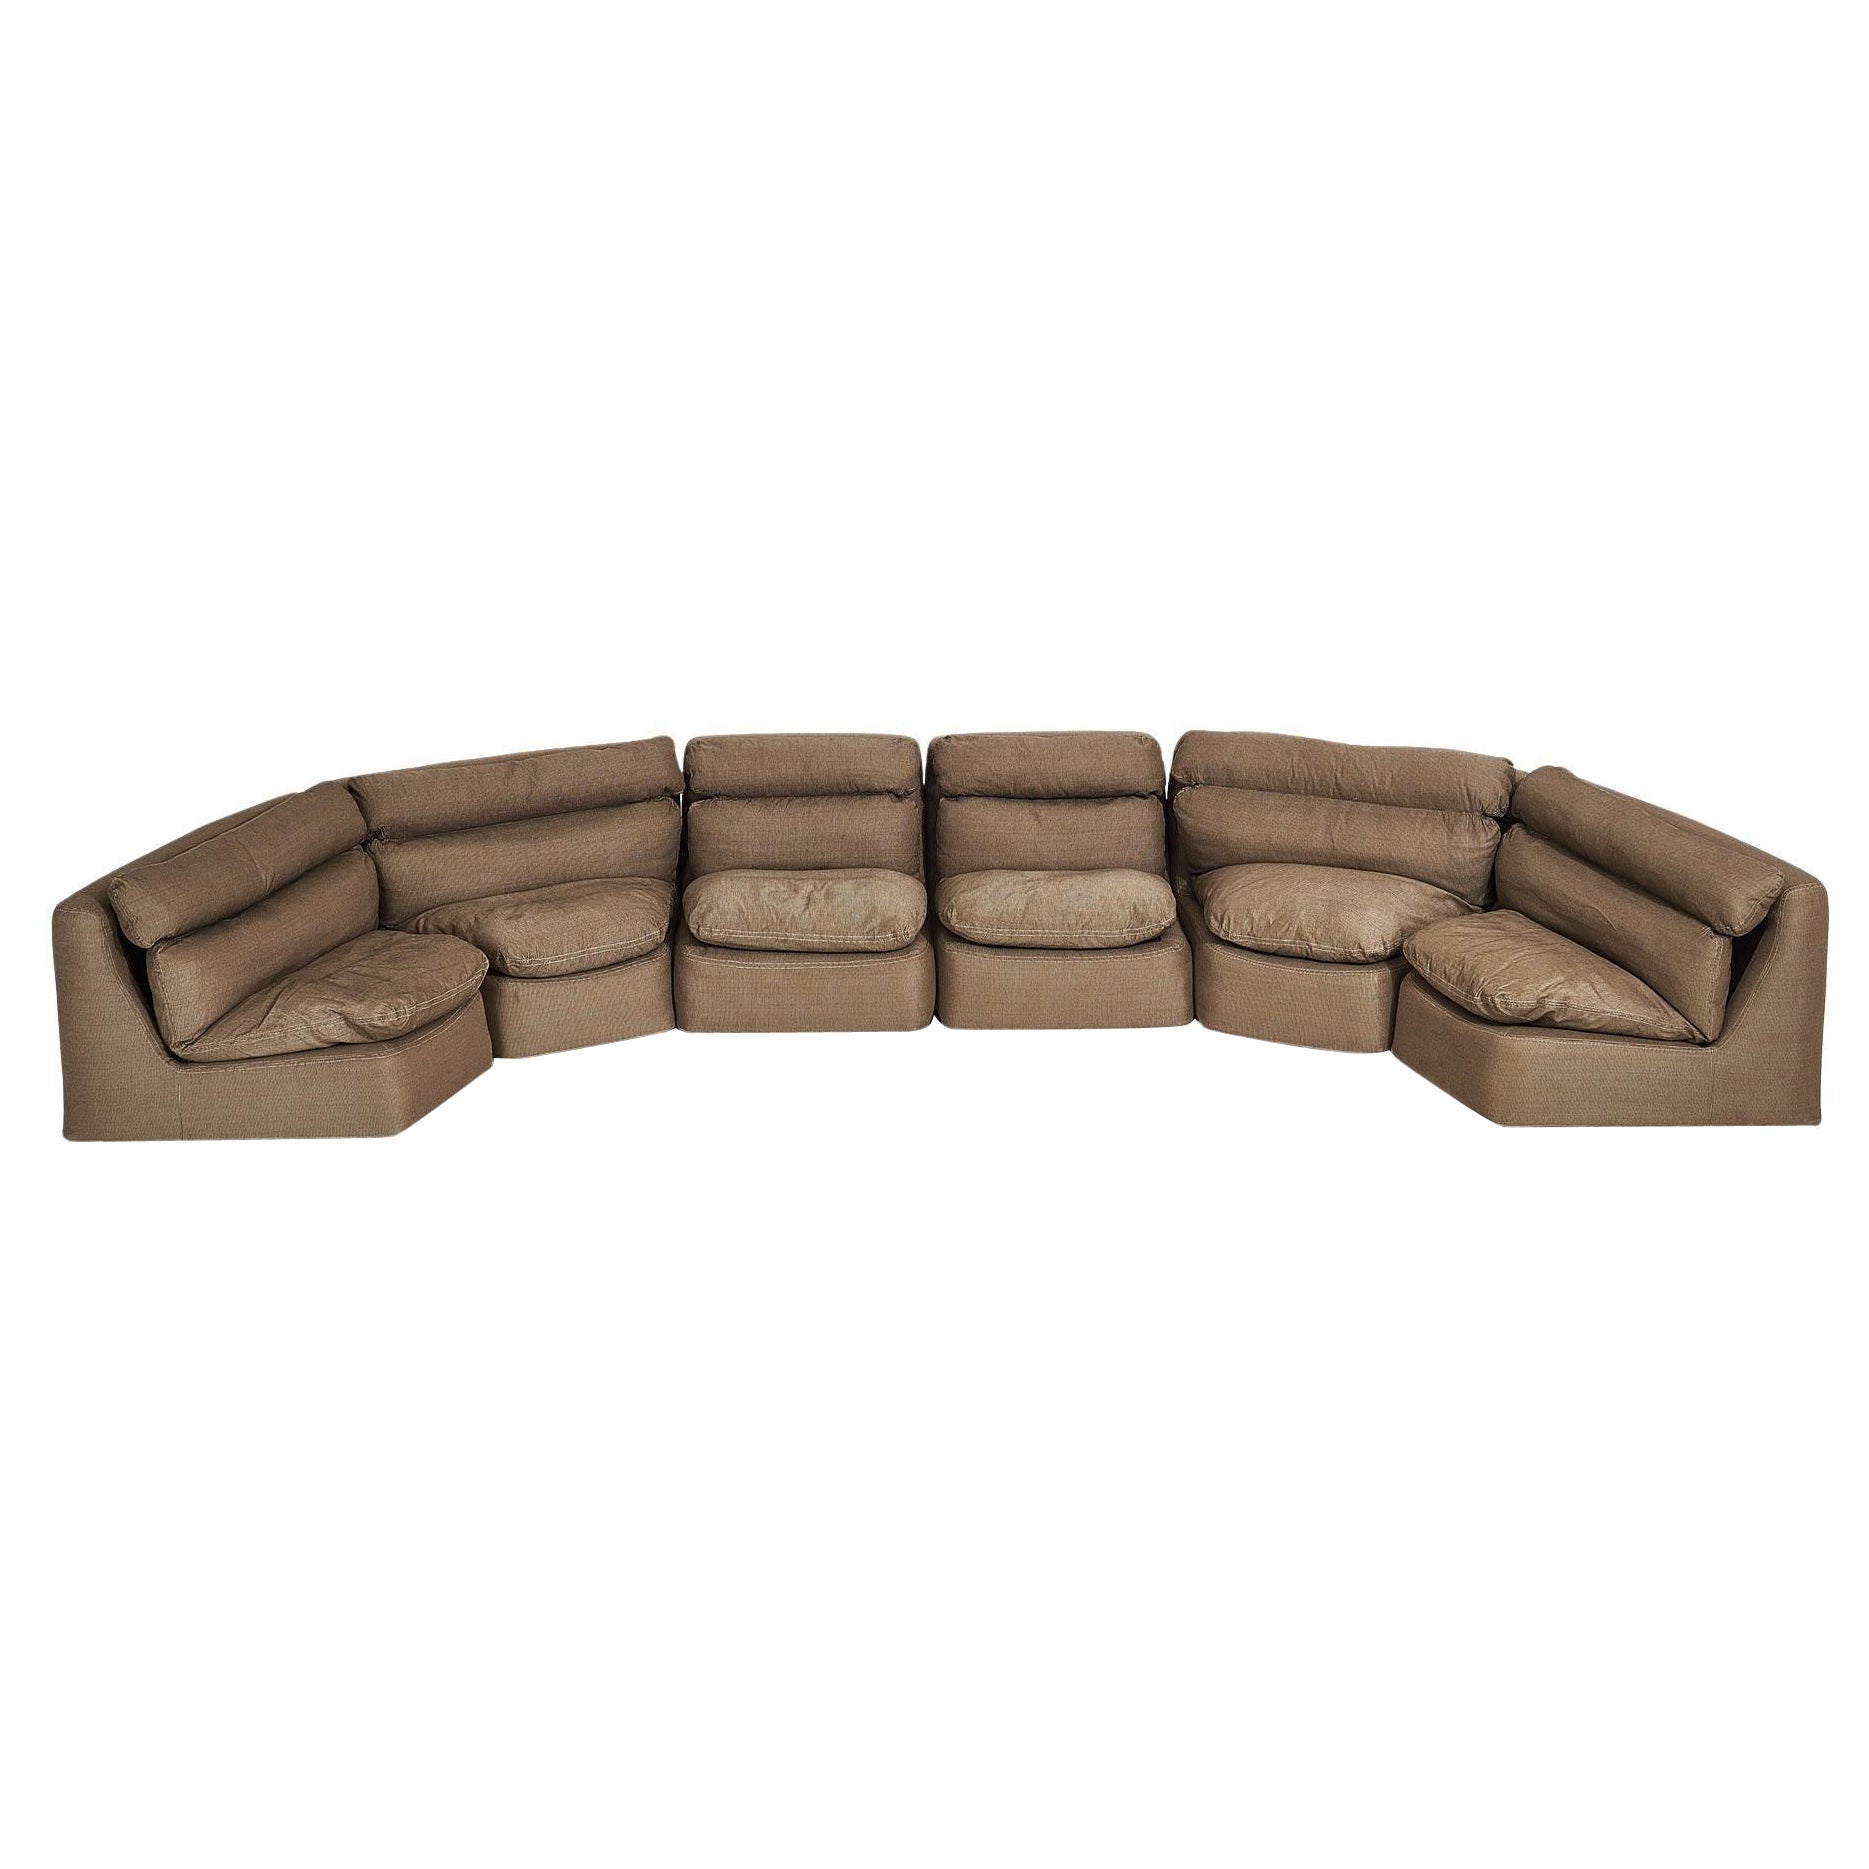 Holly Hunt Curved Modular Sectional, 1990 For Sale